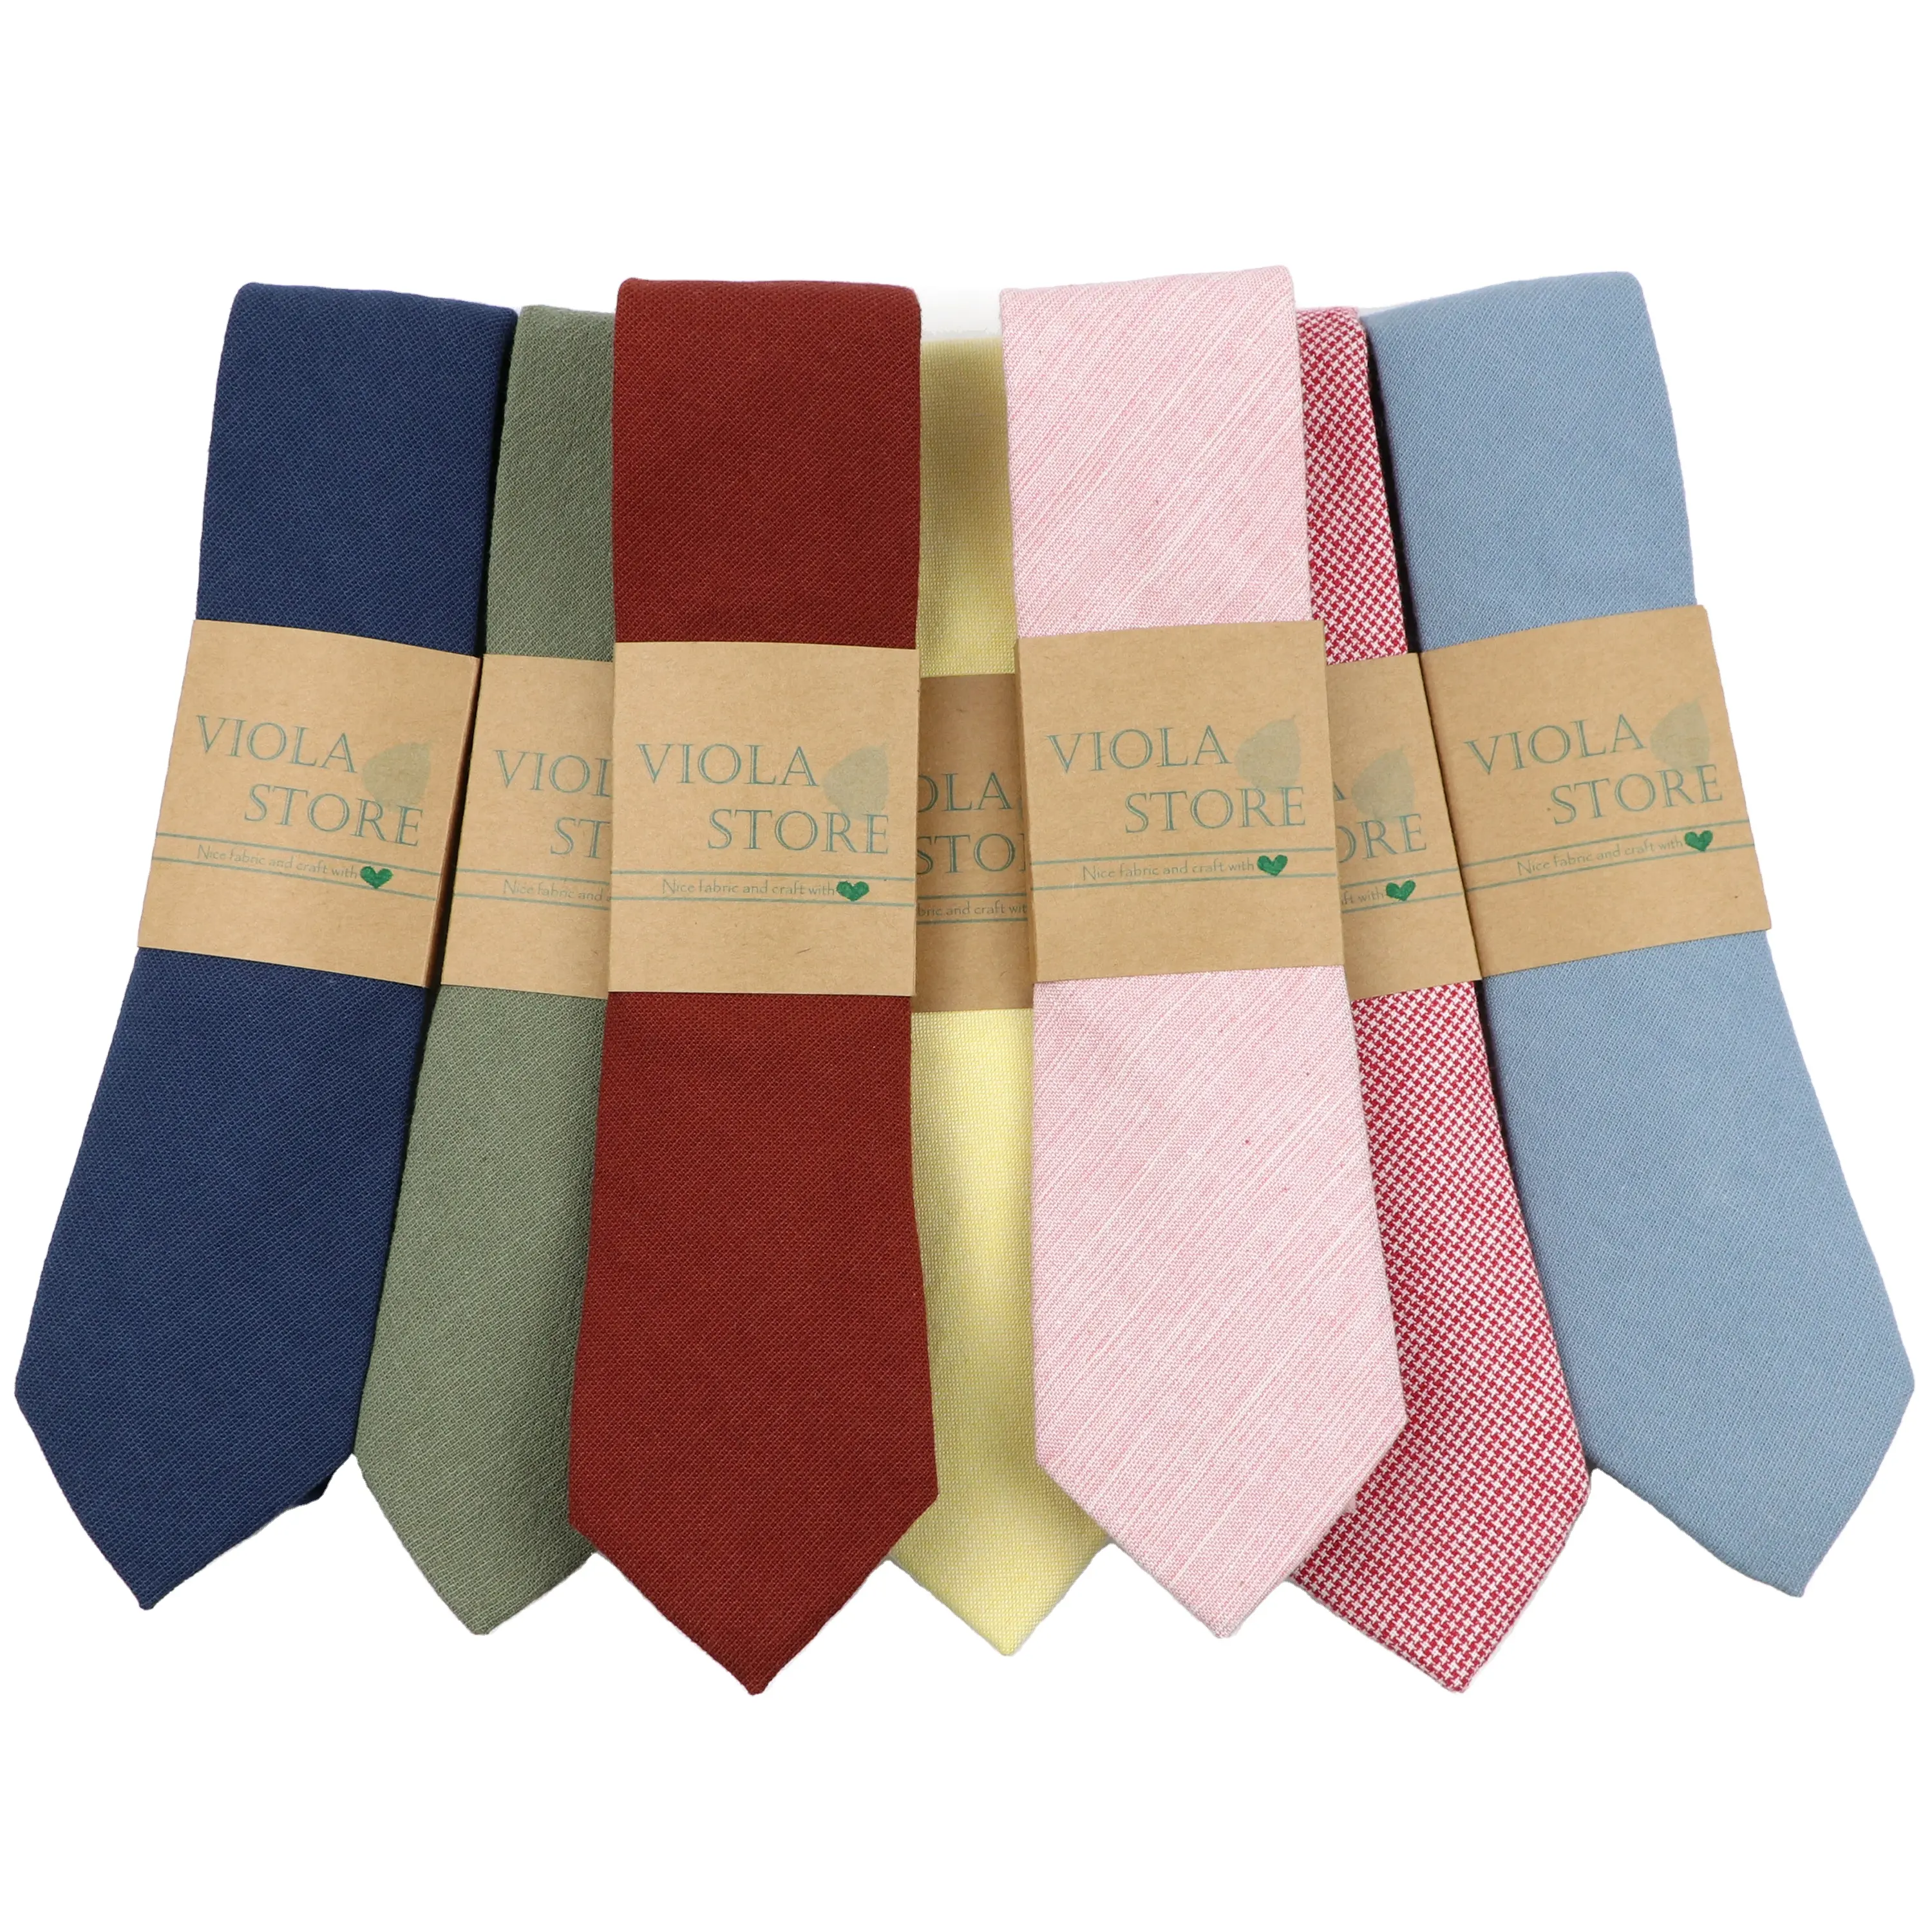 New Colorful Solid 100%Cotton Neck Tie 6cm Skinny Pink Sky Blue Dress Wedding Party Tuxedo Tie Gift BowTie Cravat Mens Accessory